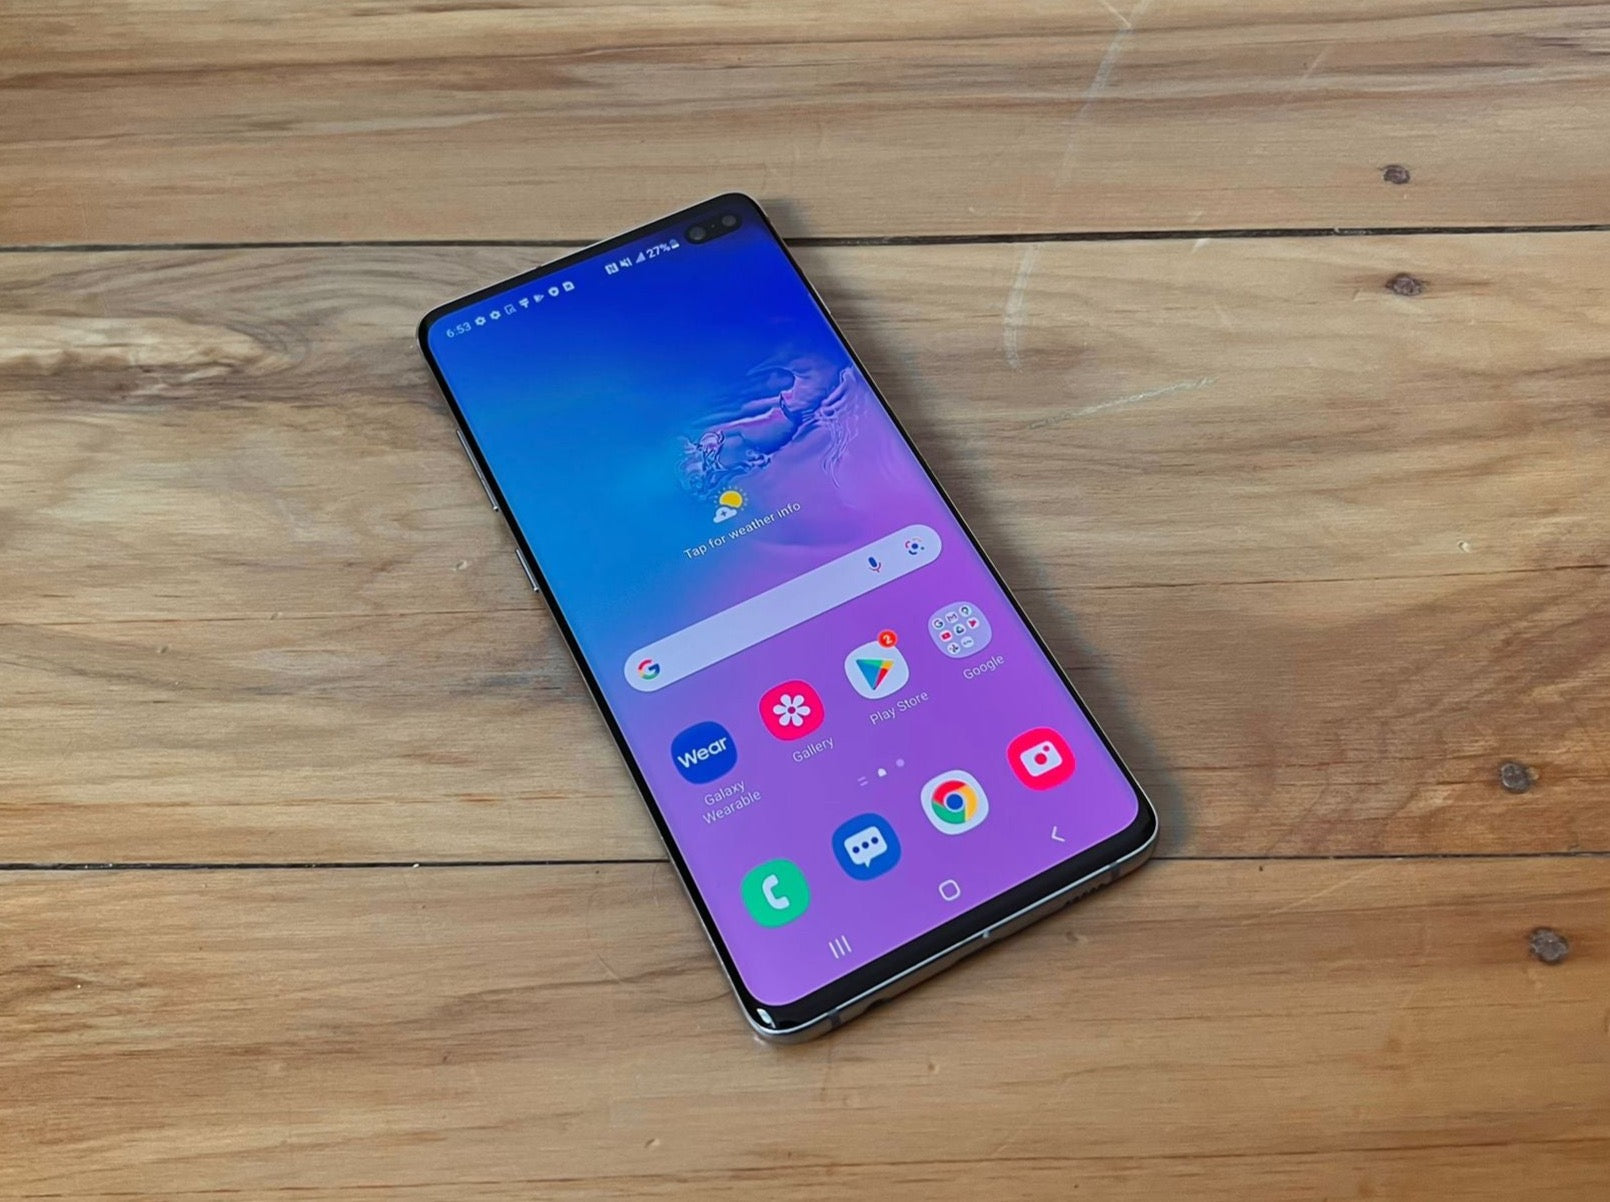 Samsung Galaxy S10 Plus Blue 128GB (Like New) With New Case, Glass Screen Protector & Shipping